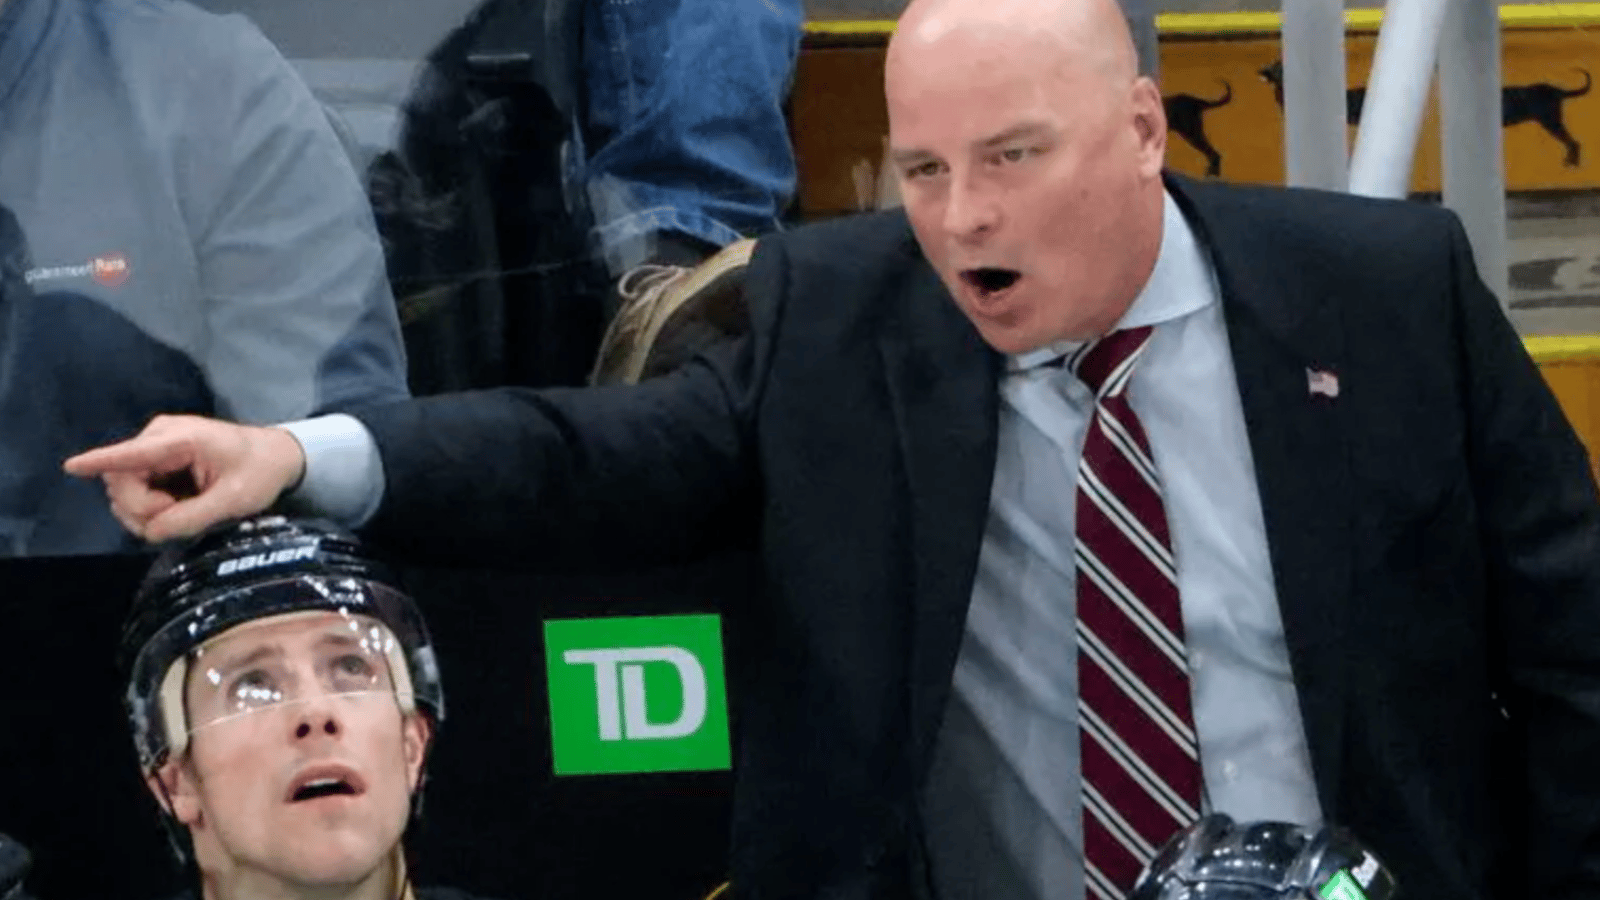 Bruins coach Jim Montgomery calls out the NHL 